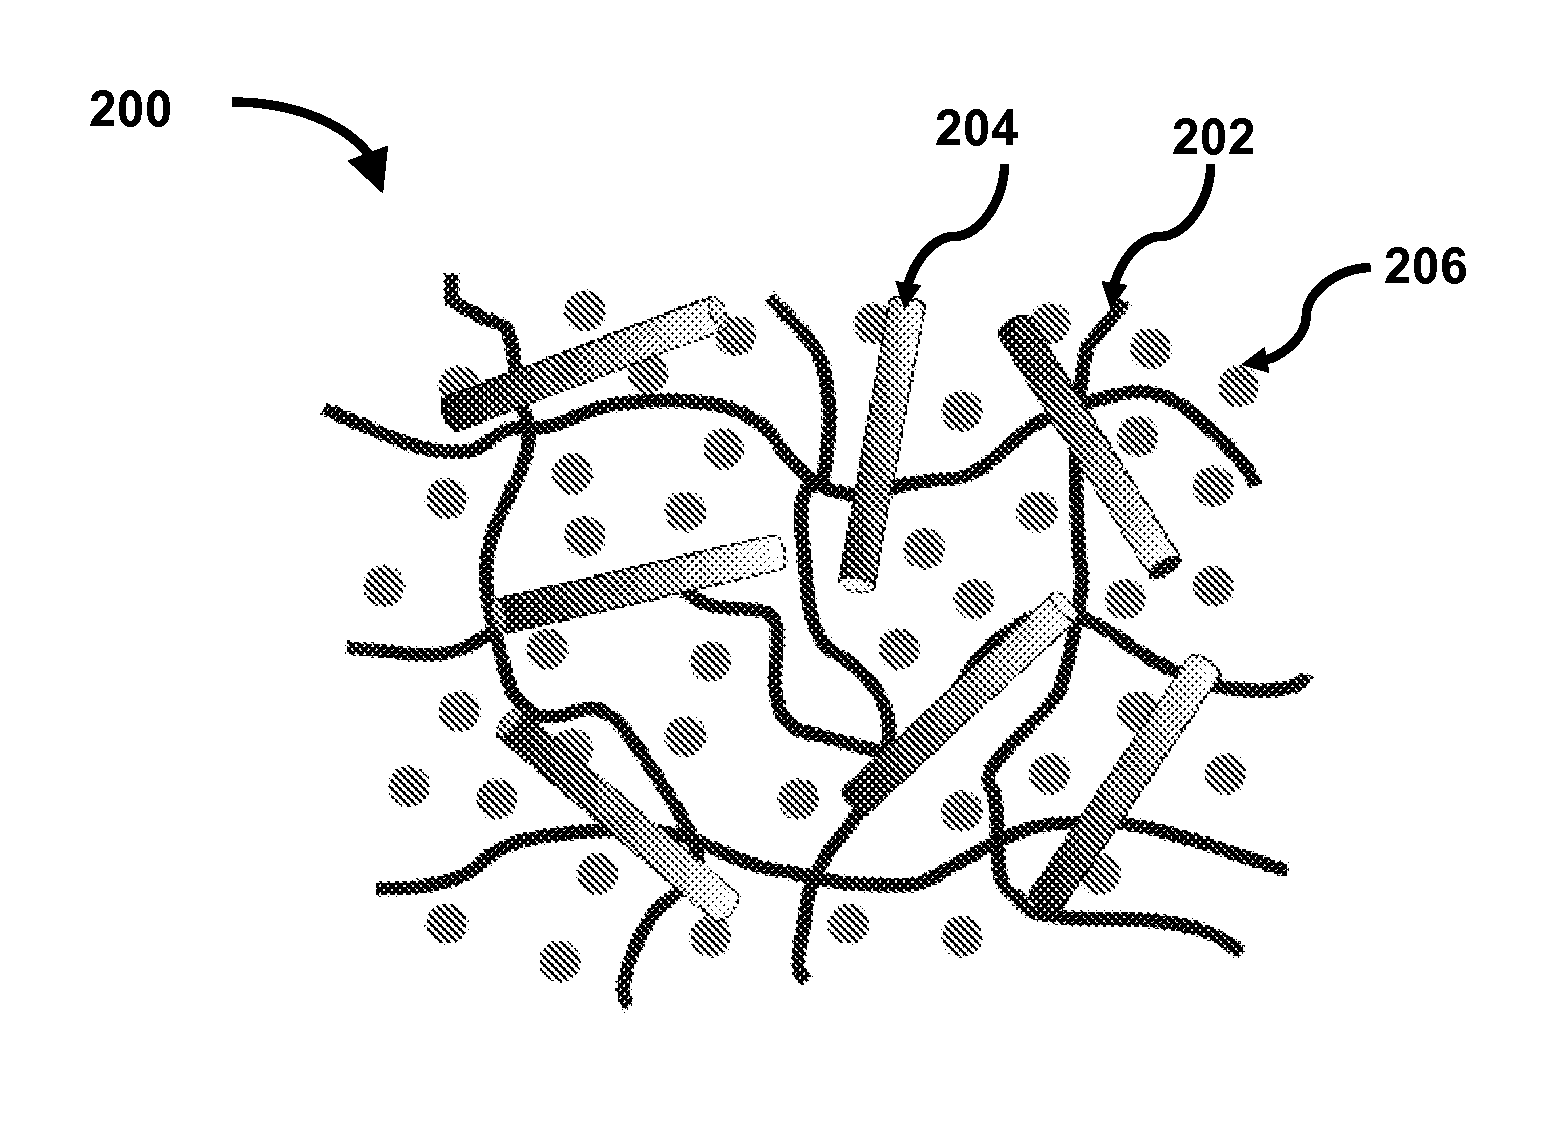 Solvent assisted processing to control the mechanical properties of electrically and/or thermally conductive polymer composites